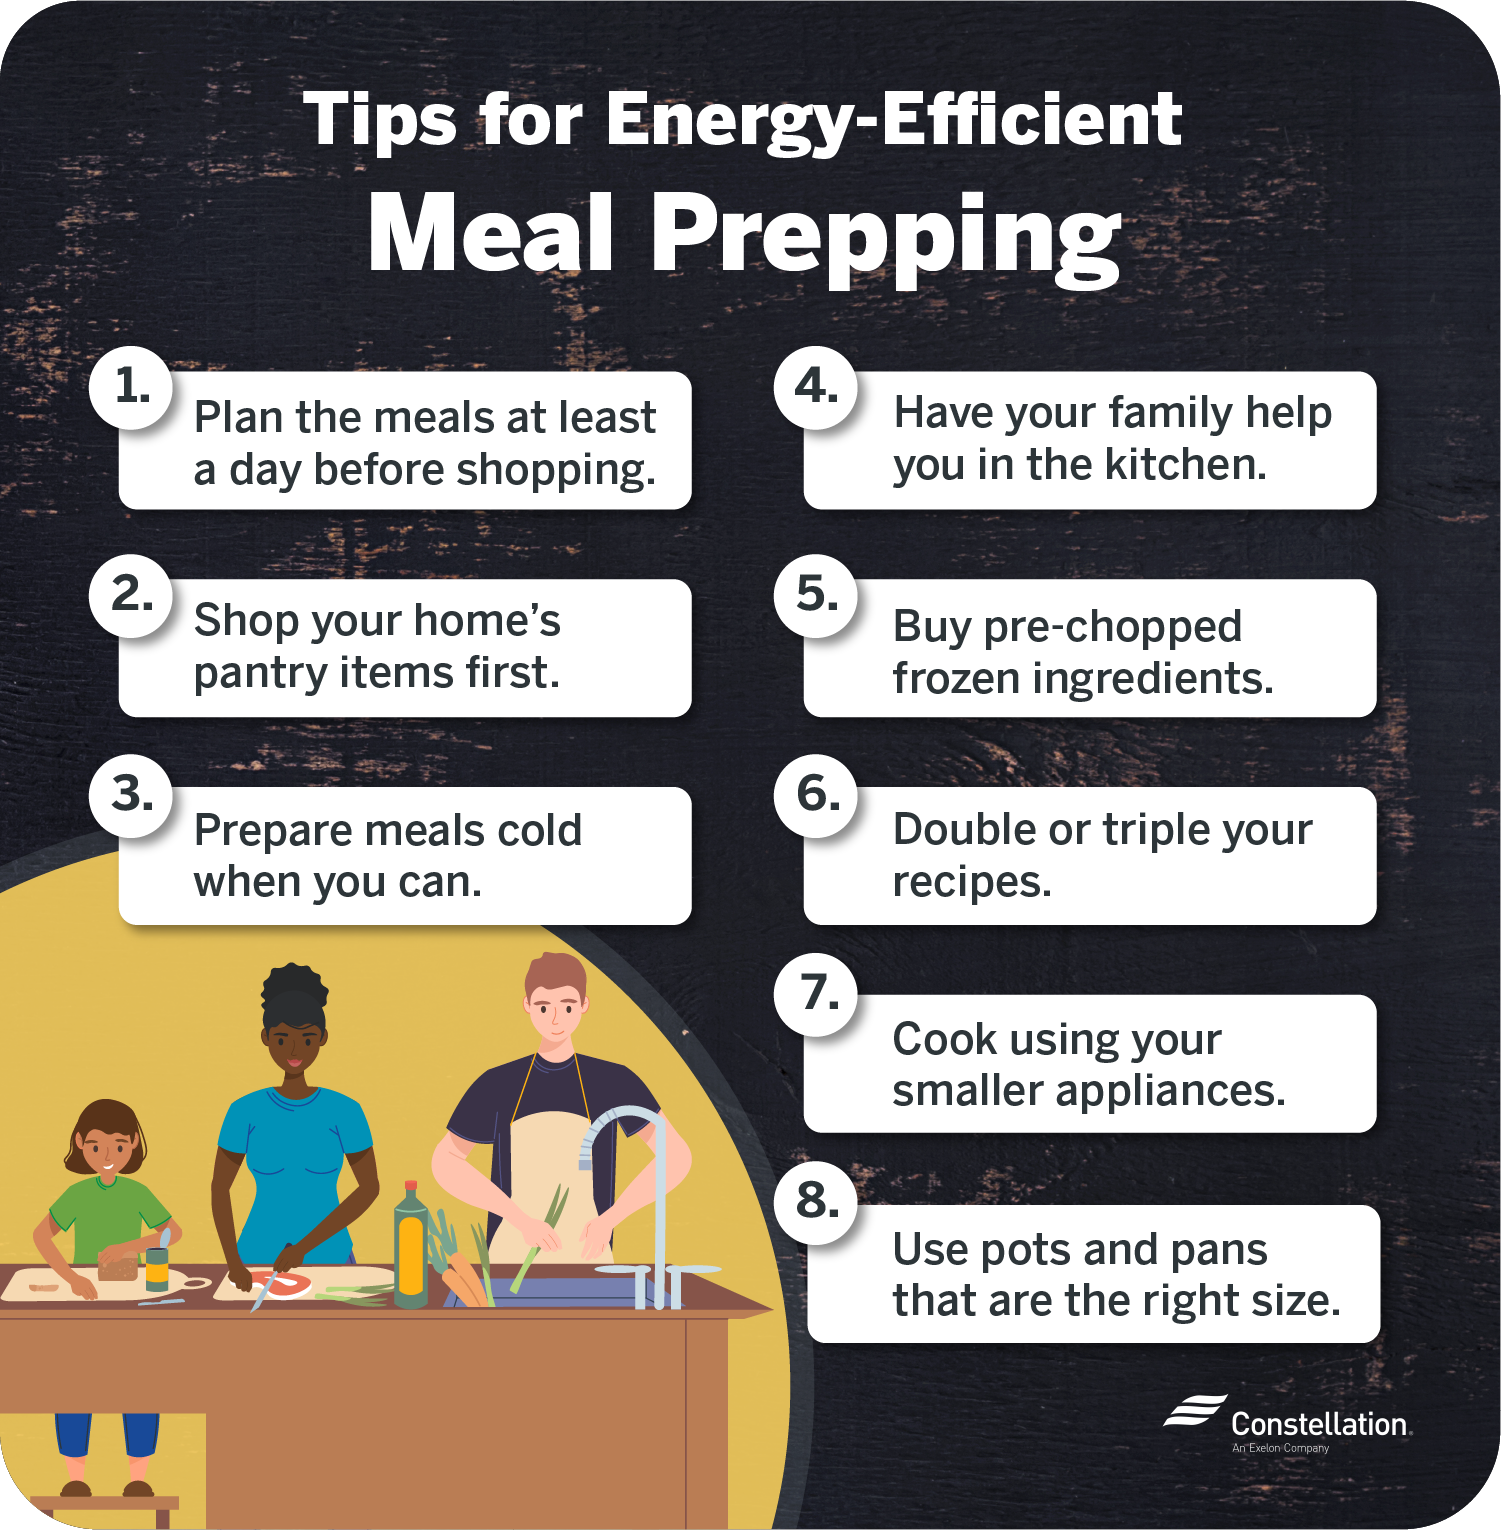 8 tips for meal prepping